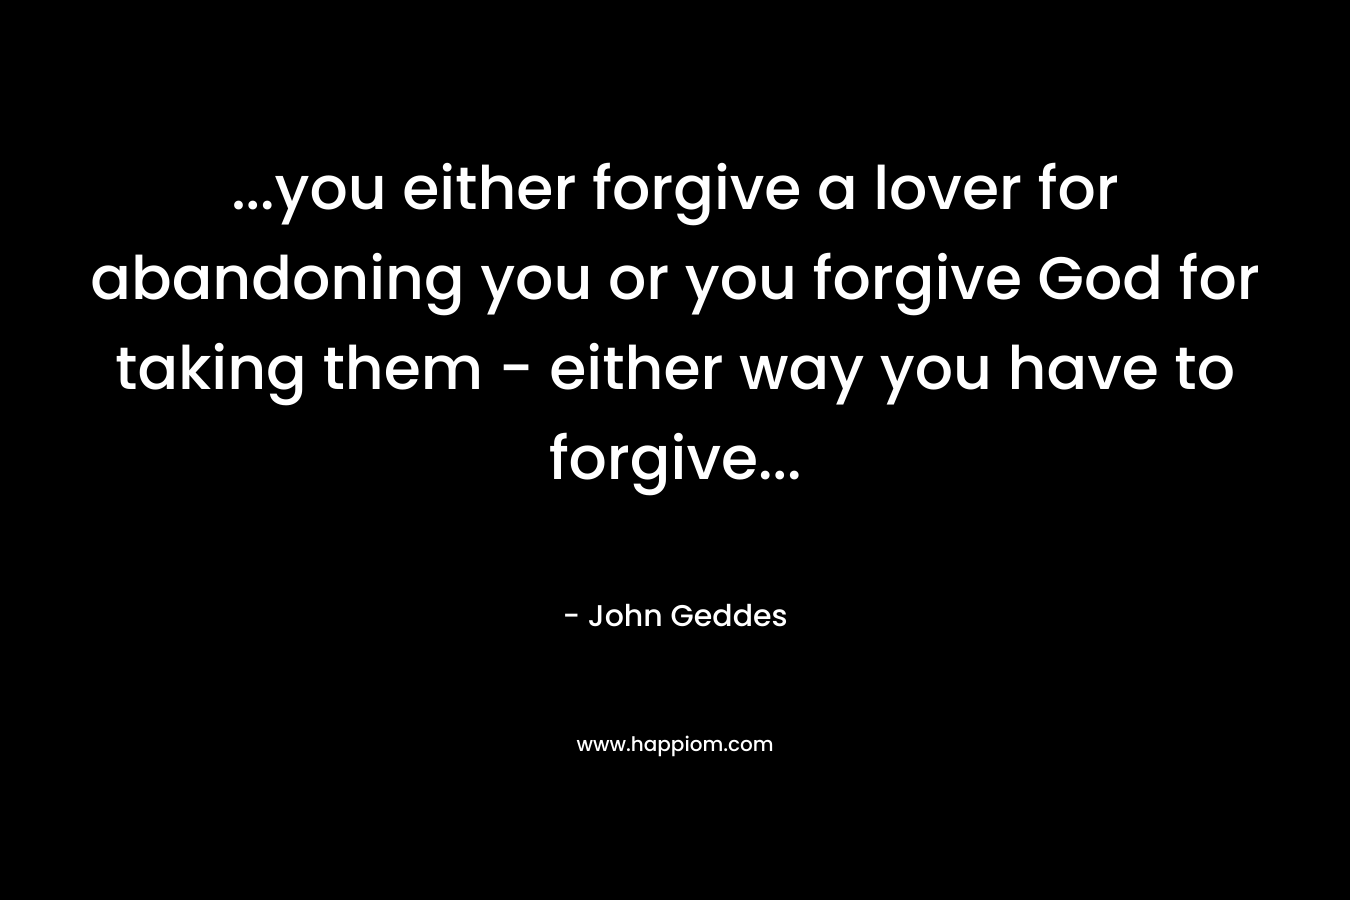 ...you either forgive a lover for abandoning you or you forgive God for taking them - either way you have to forgive...